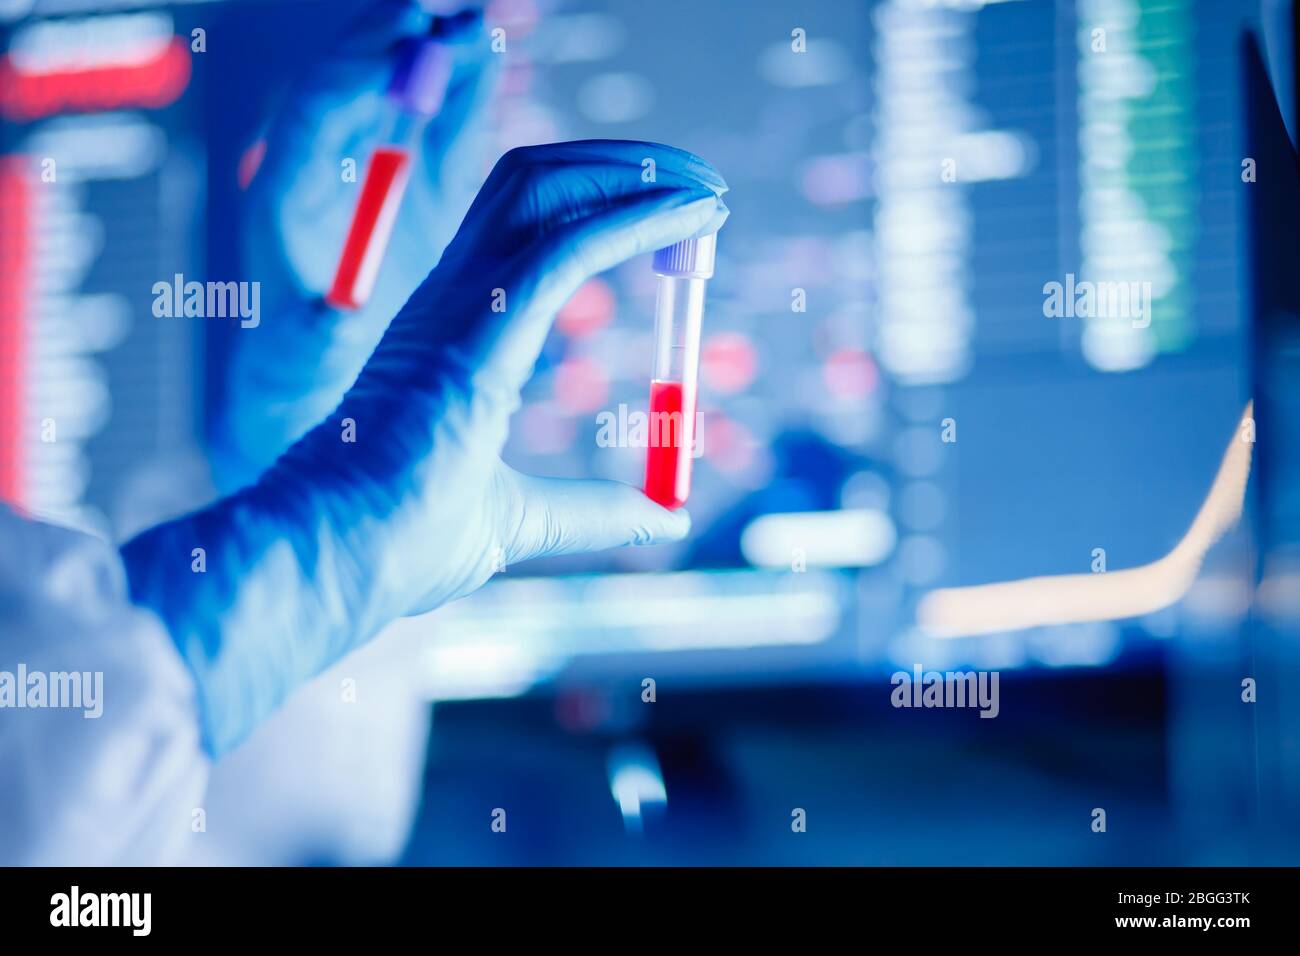 Development secret biological weapons against humans, epidemic of virus and infection of animals. Outbreak concept of unknown disease Stock Photo